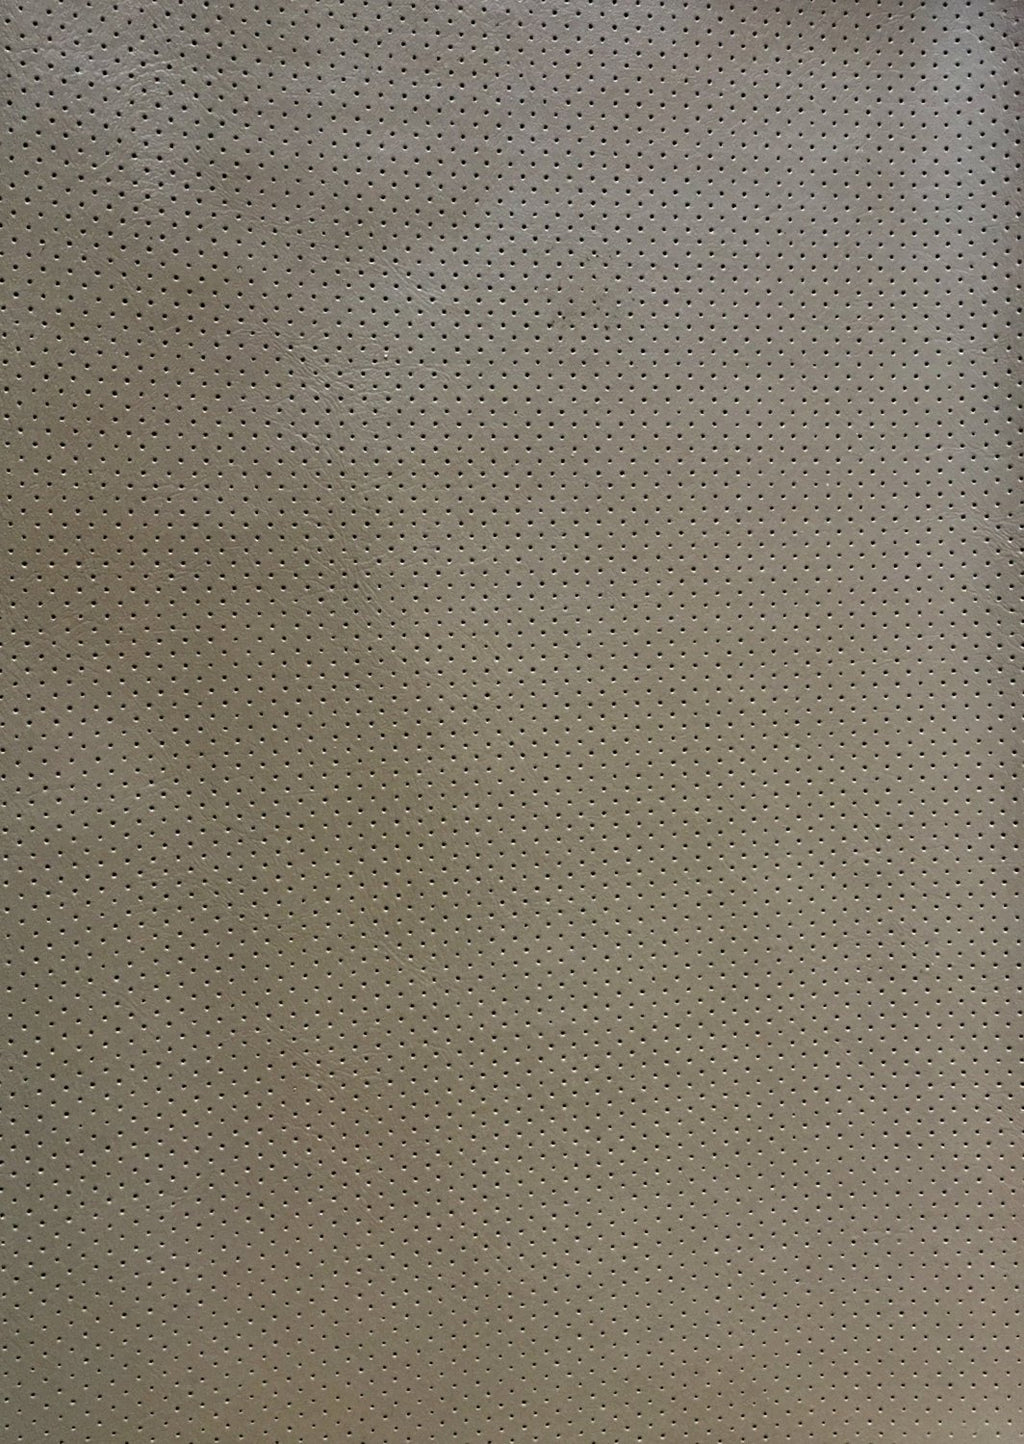 Beige Faux Leather, Vinyl Upholstery Fabric, 54 W, By the Yard